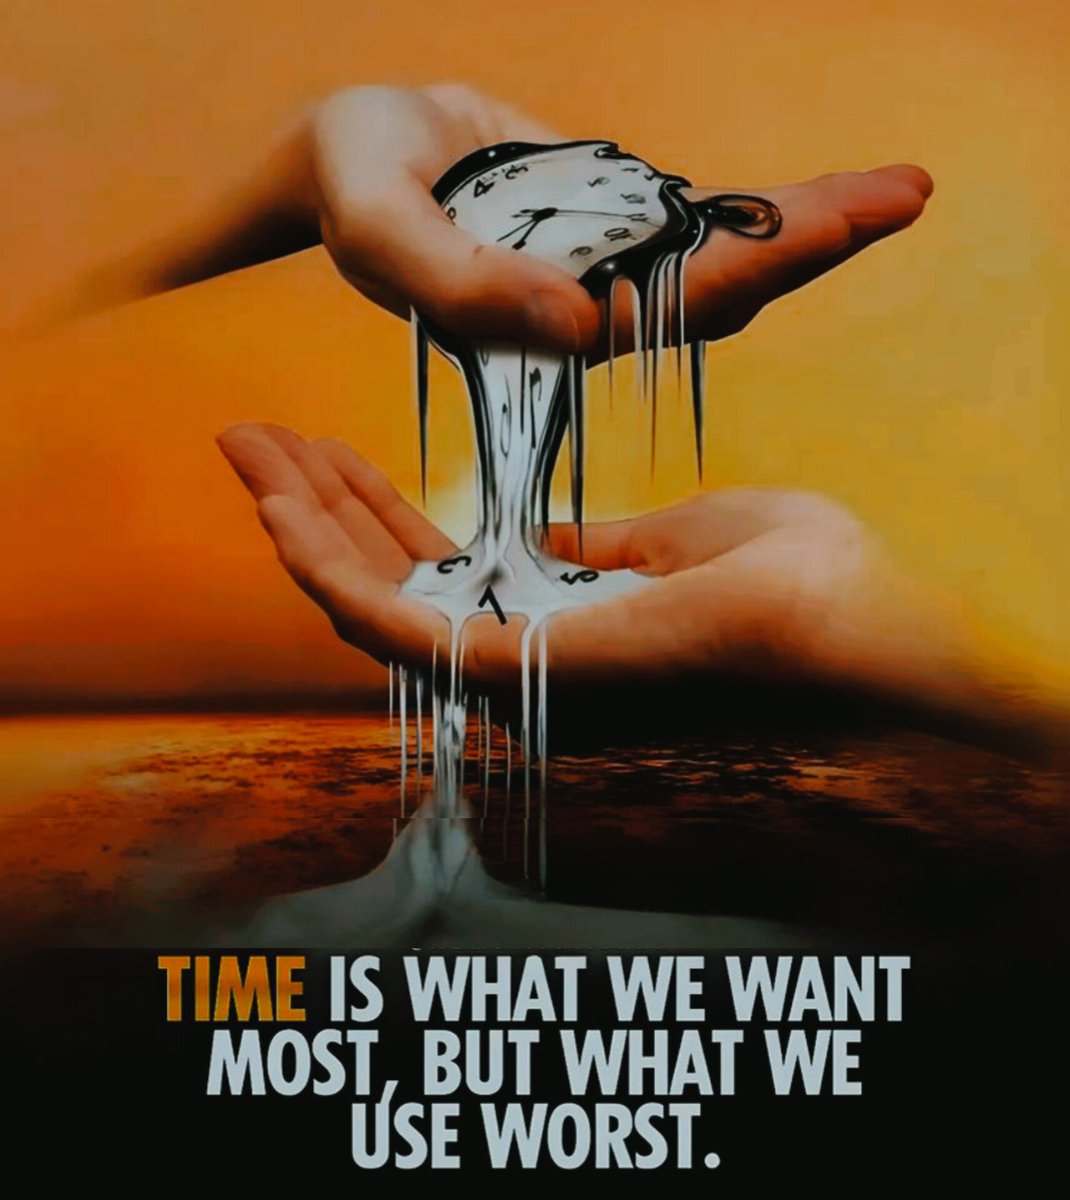 Time does not pass, it continues

#foryoupage #foryou #viral #quotes #motivationalquotes #twitter #instagram #instagood #facebook #tiktok #pinterest #1m #100k #love #loveandwildhearts #pak #phillippines #uk #uae #fypシ #whatsapp #pain #tears #friendship